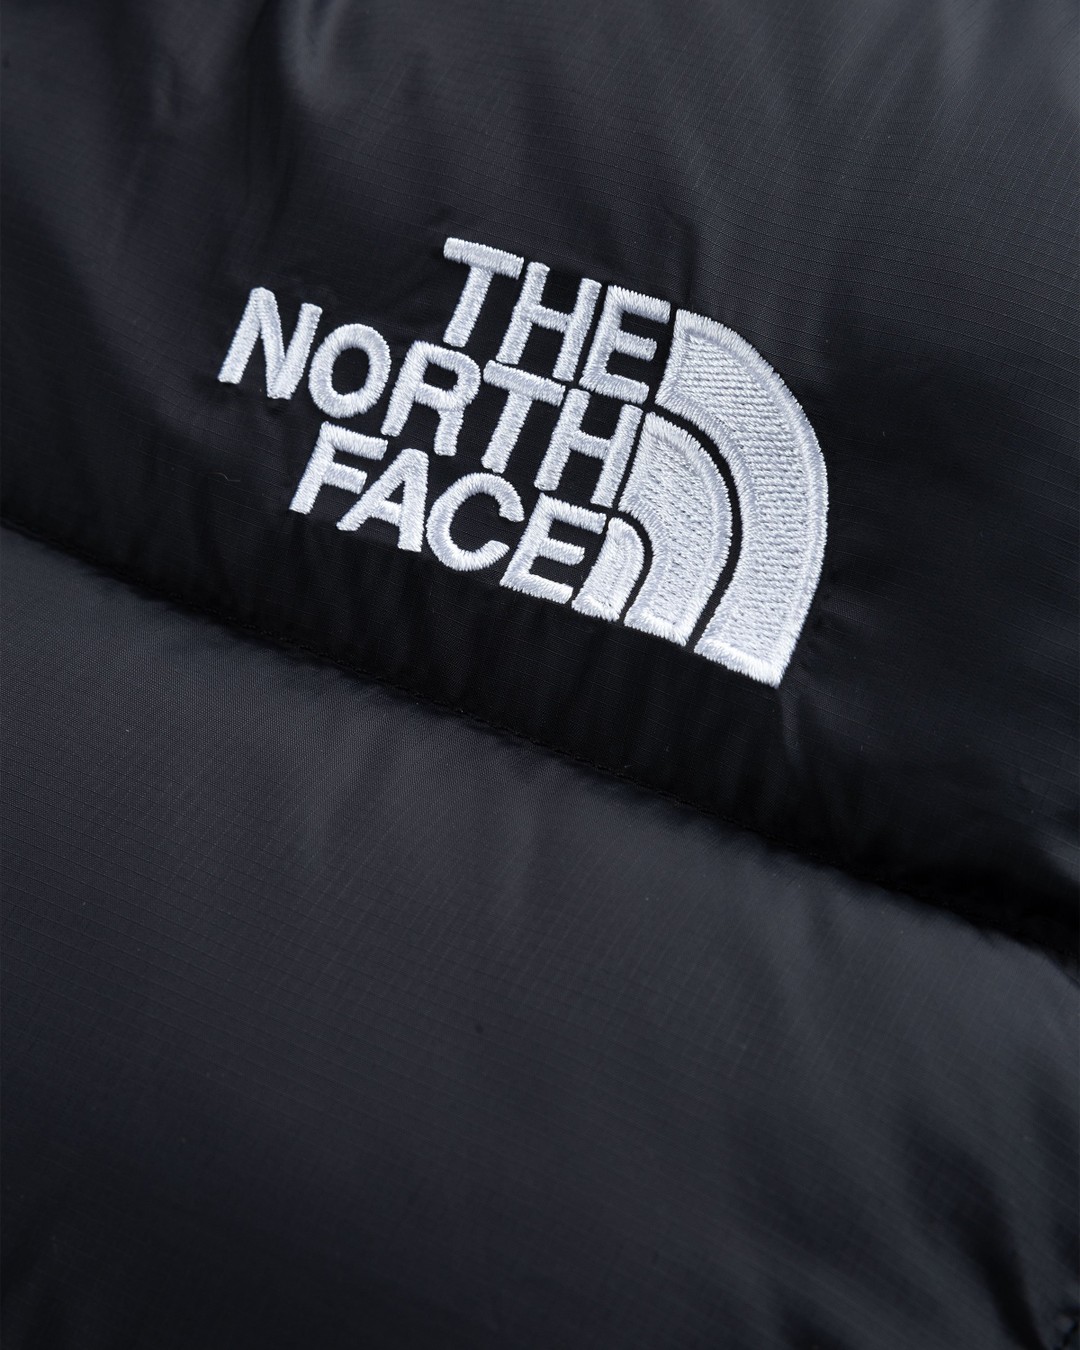 The North Face – Rusta 2.0 Puffer Jacket Black - Outerwear - Black - Image 7